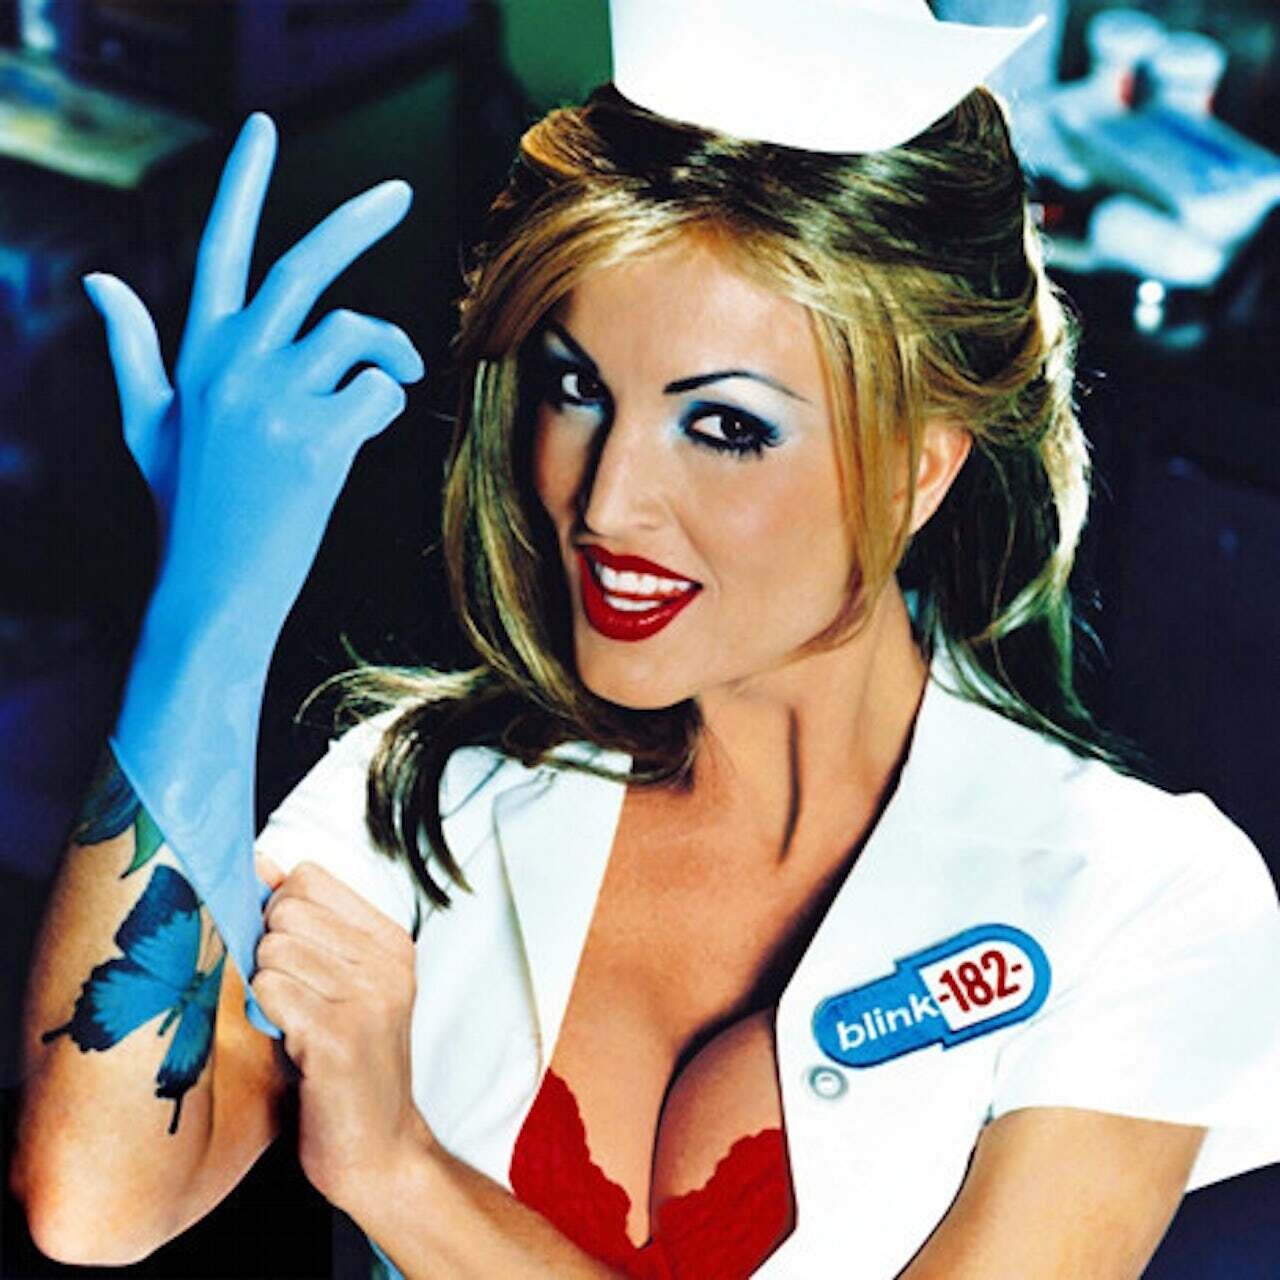 Blink-182 / Enema Of The State